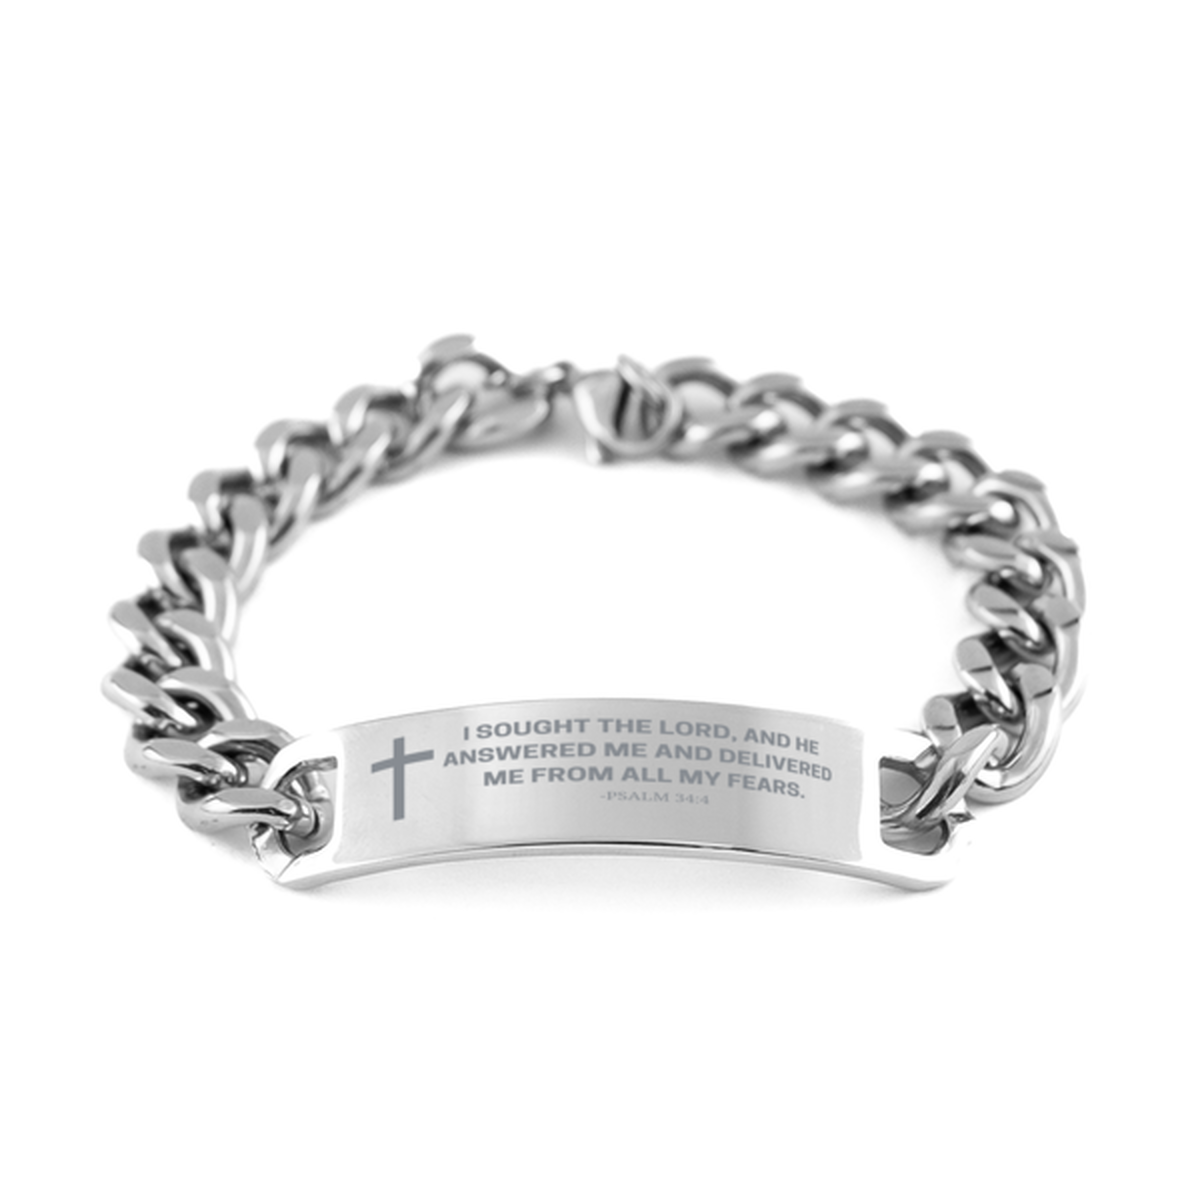 Baptism Gifts For Teenage Boys Girls, Christian Bible Verse Cuban Chain Bracelet, I sought the Lord, Catholic Confirmation Gifts for Son, Godson, Grandson, Nephew